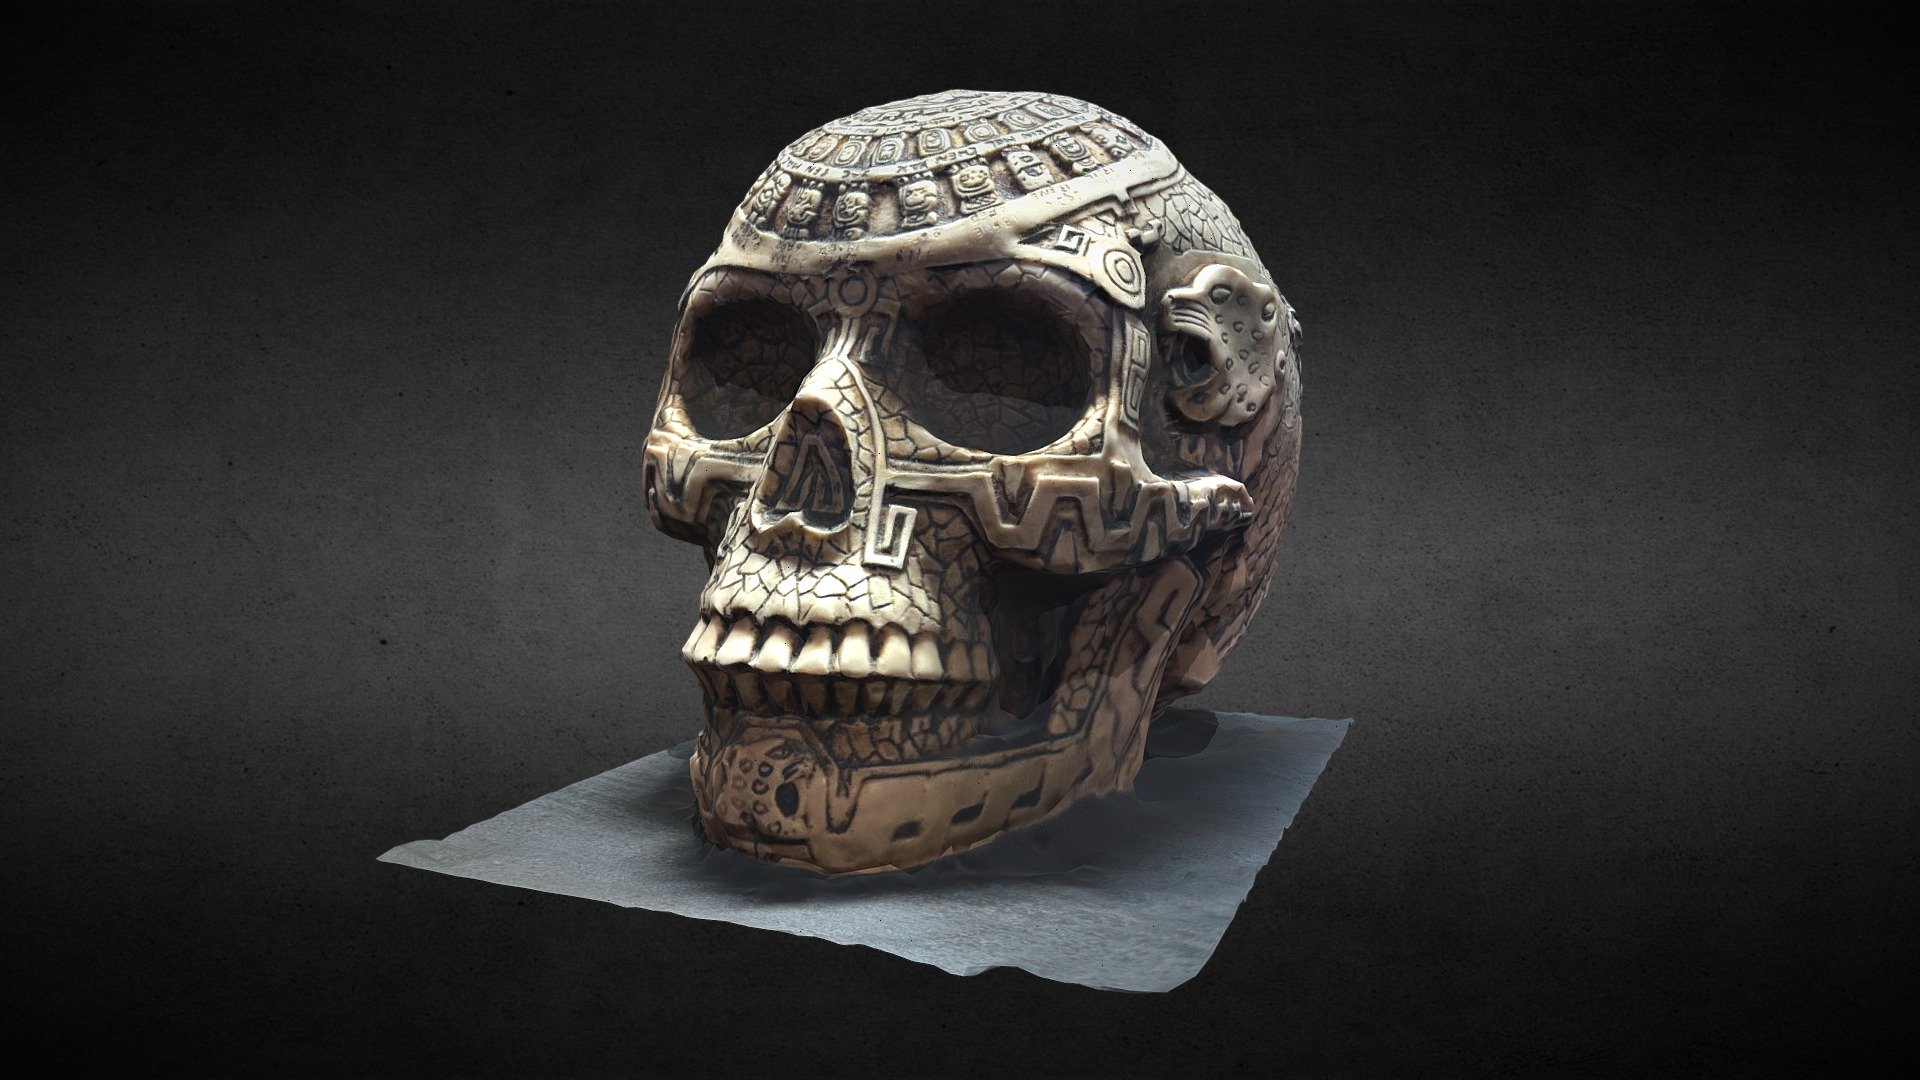 Hey there, 3D model enthusiasts! 😄

Aztec Skull scanned using Polycam photgrammetry.

UAVisionary is a specialist Drone Photography and Videography Company based in the UK Visit ou website to find out more UAVisionary Ltd (www.uavisionary.co.uk)

Thanks for stopping by! 📸Thanks for taking a look at our photogrammetry models.

Right, where’s my phone - time to scan some more stuff for the metaverse 3d model